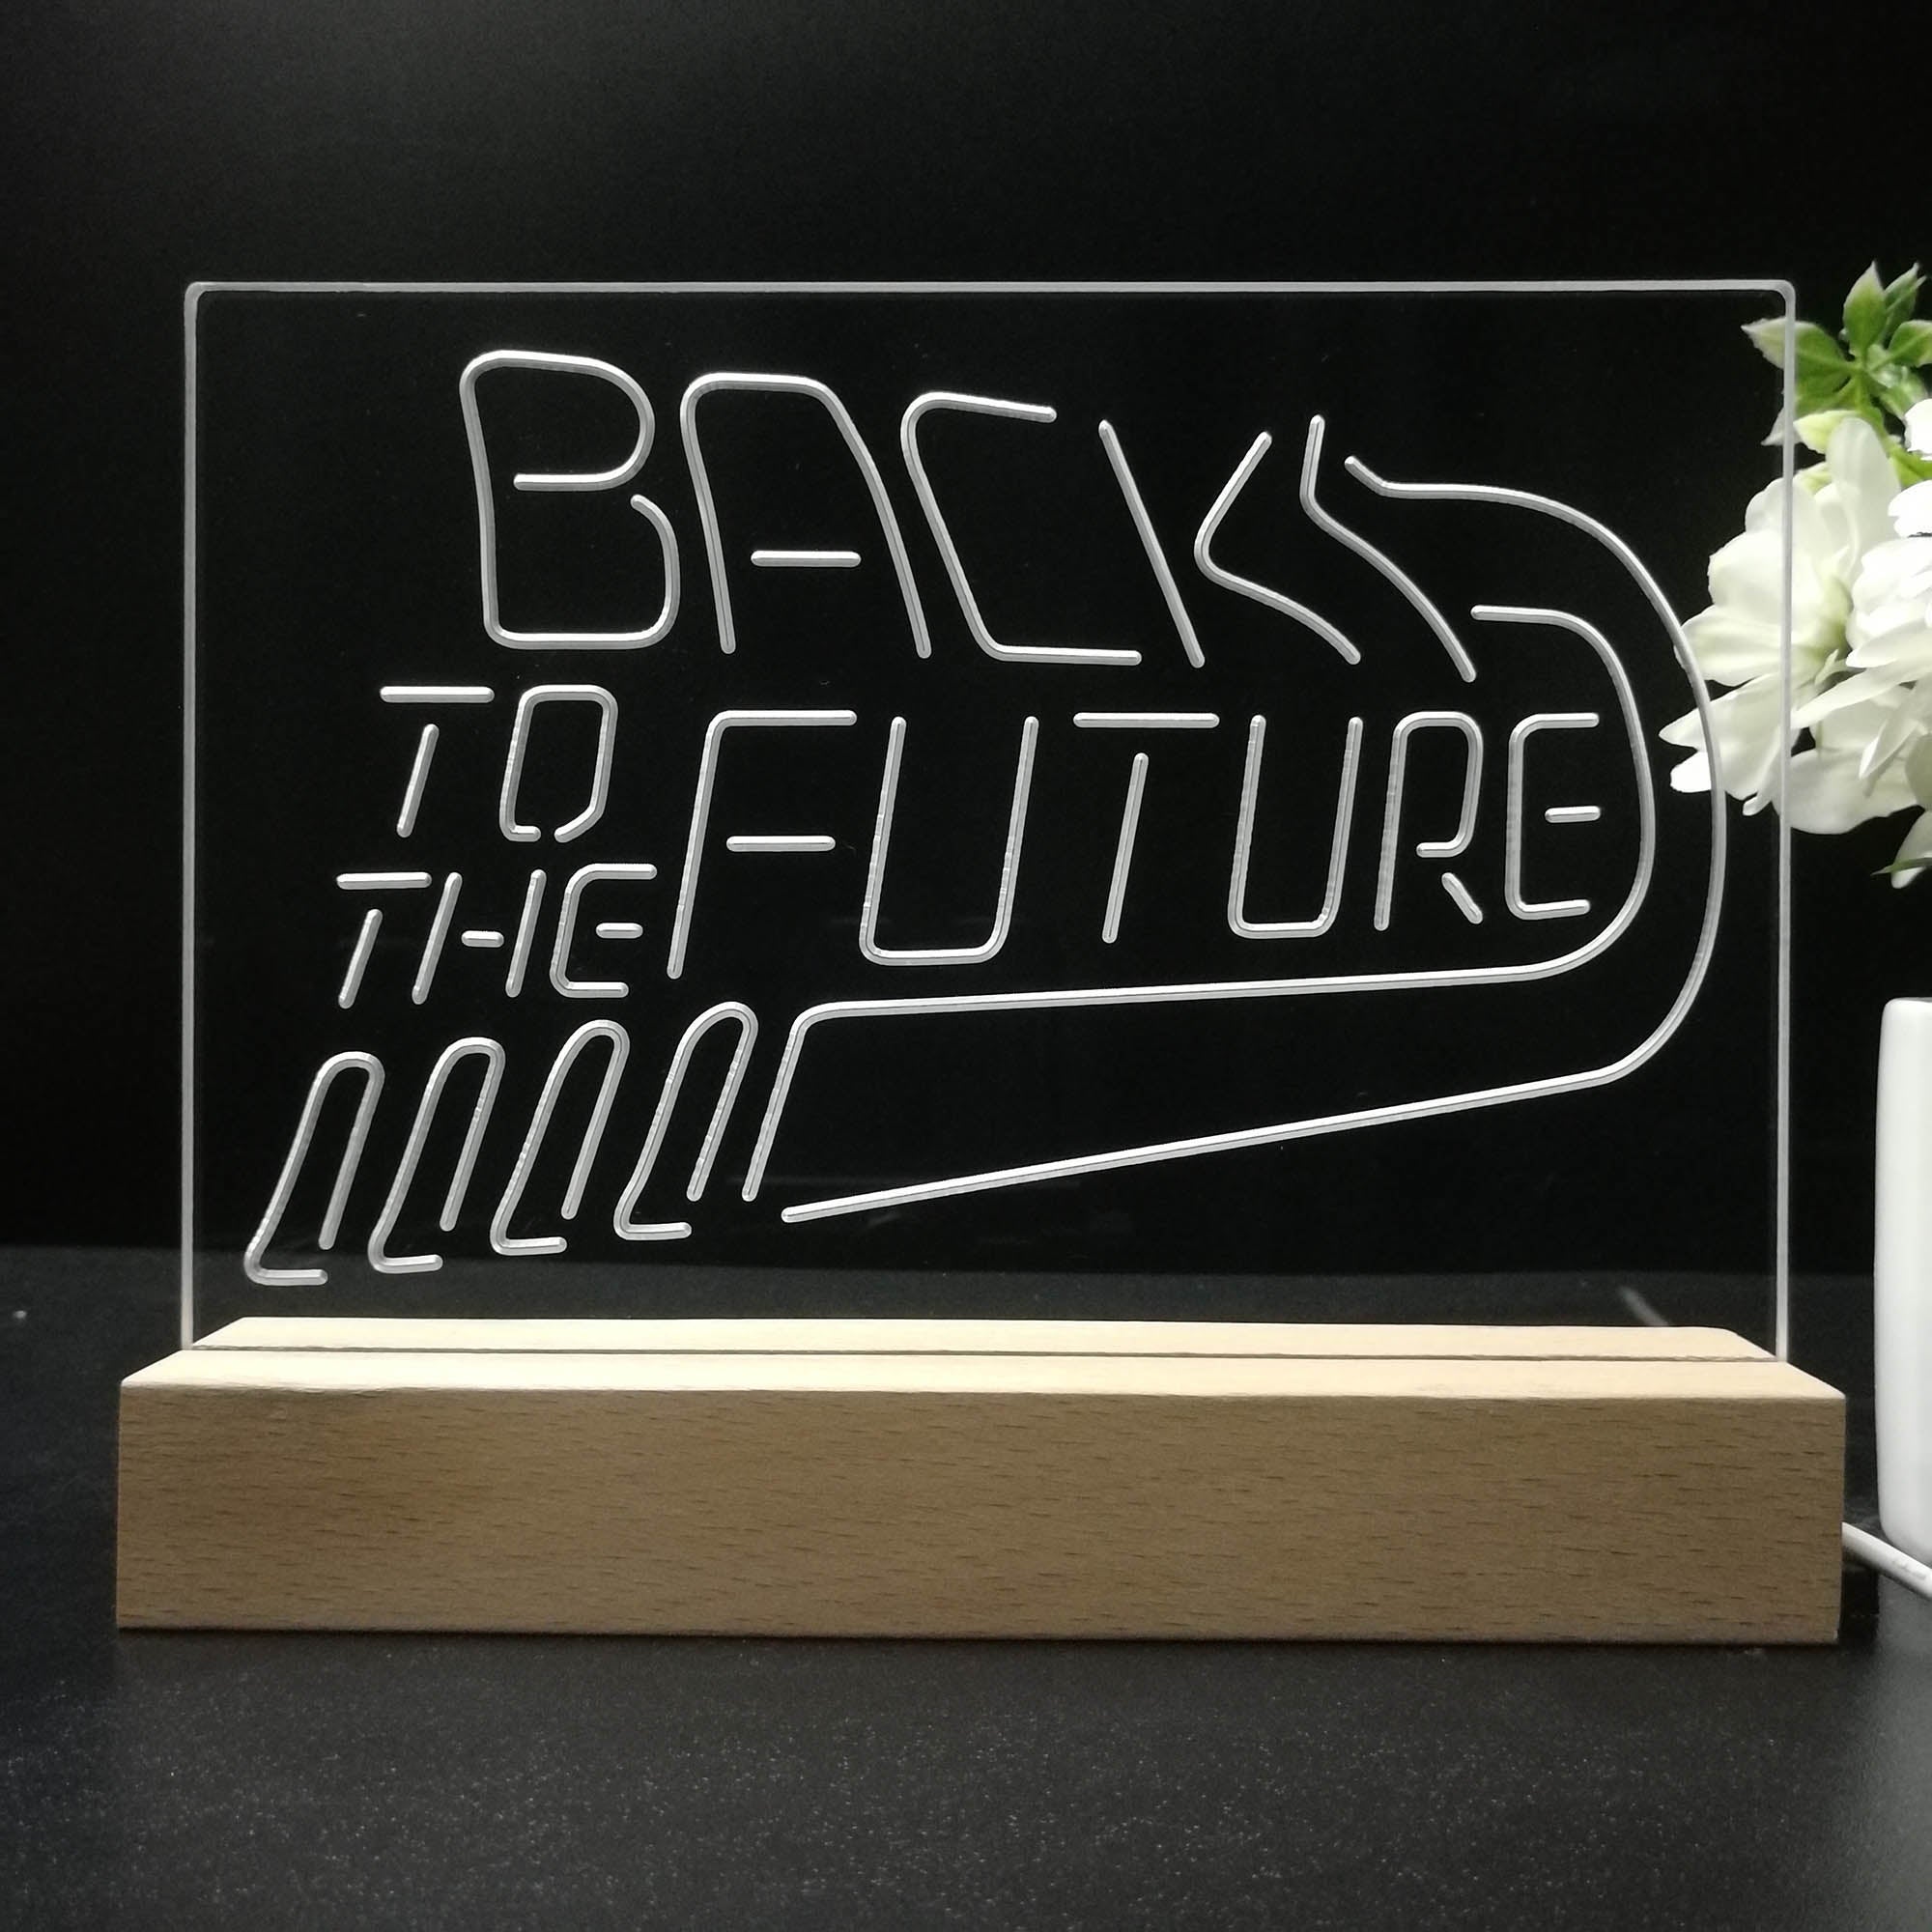 Back to the Future Movie Home Theater 3D Illusion Night Light Desk Lamp